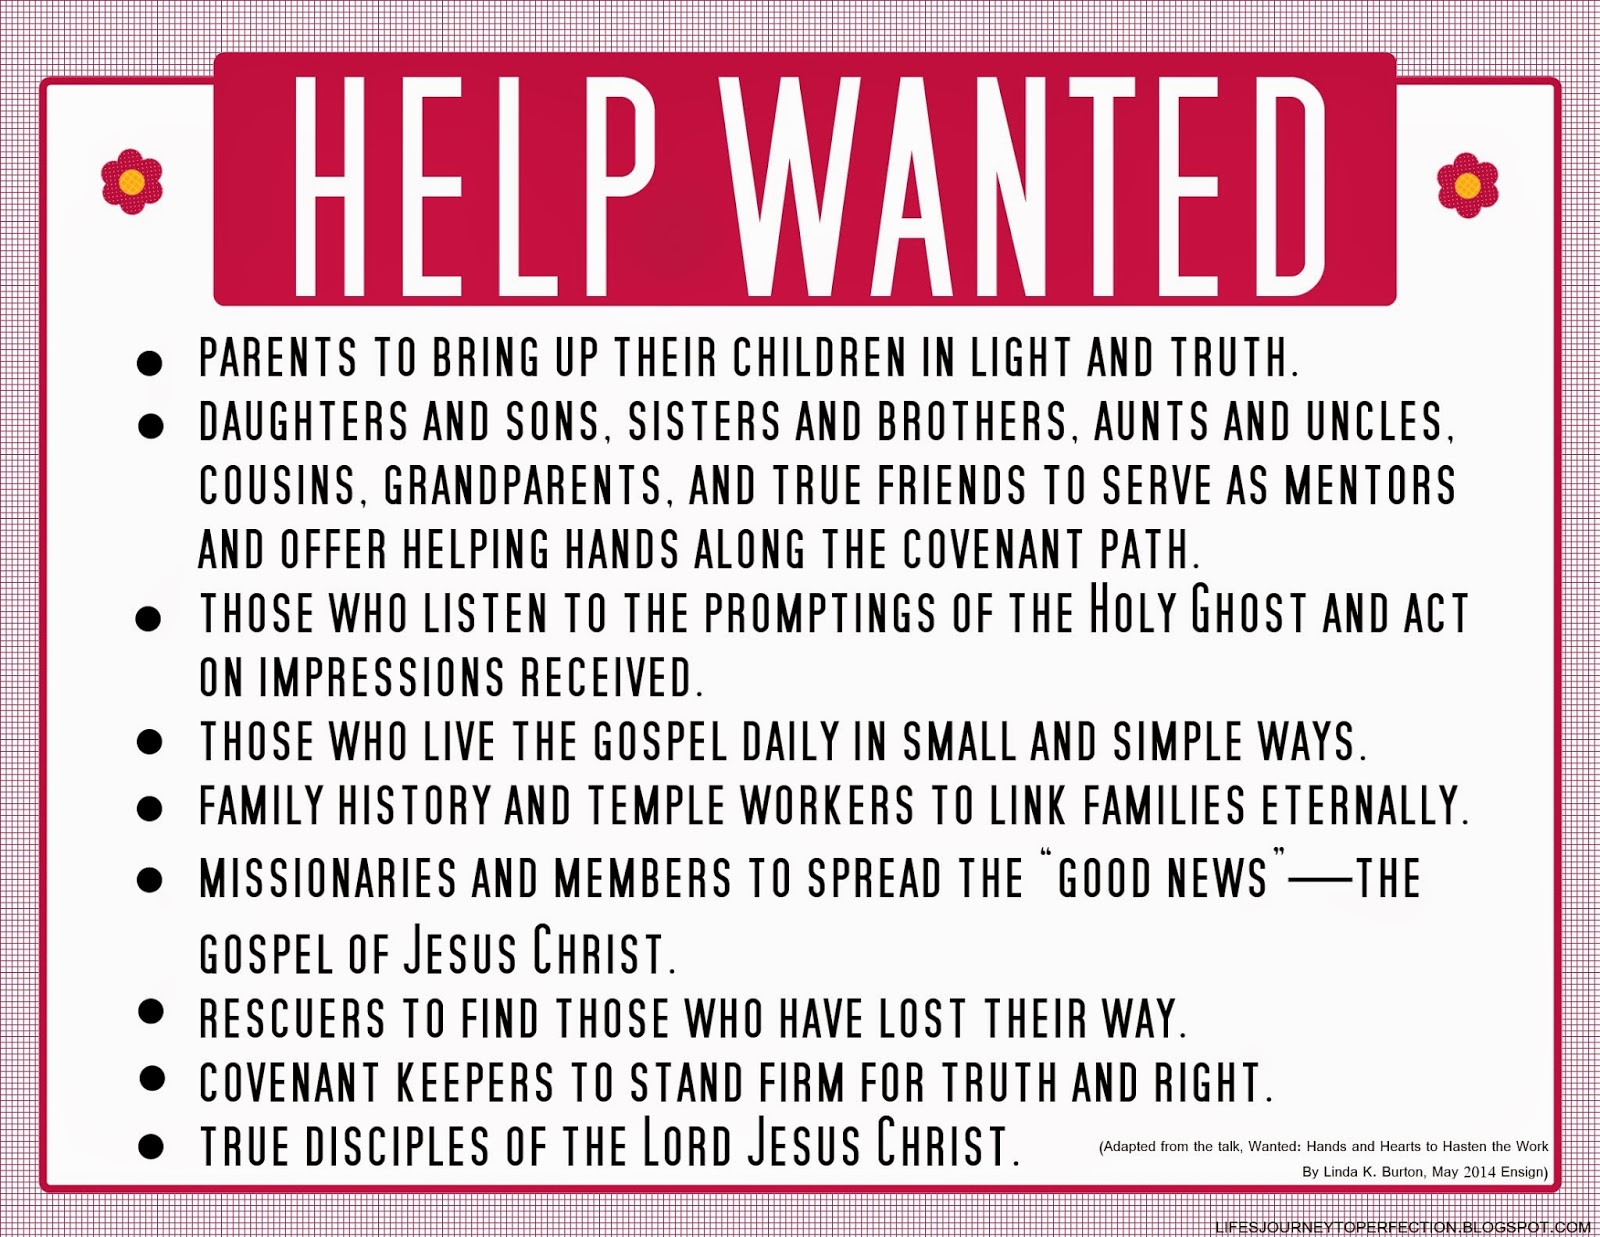 Lived talked wanted. Help wanted. Spread the Gospel. Helpers wanted что писать. Wanted ads.